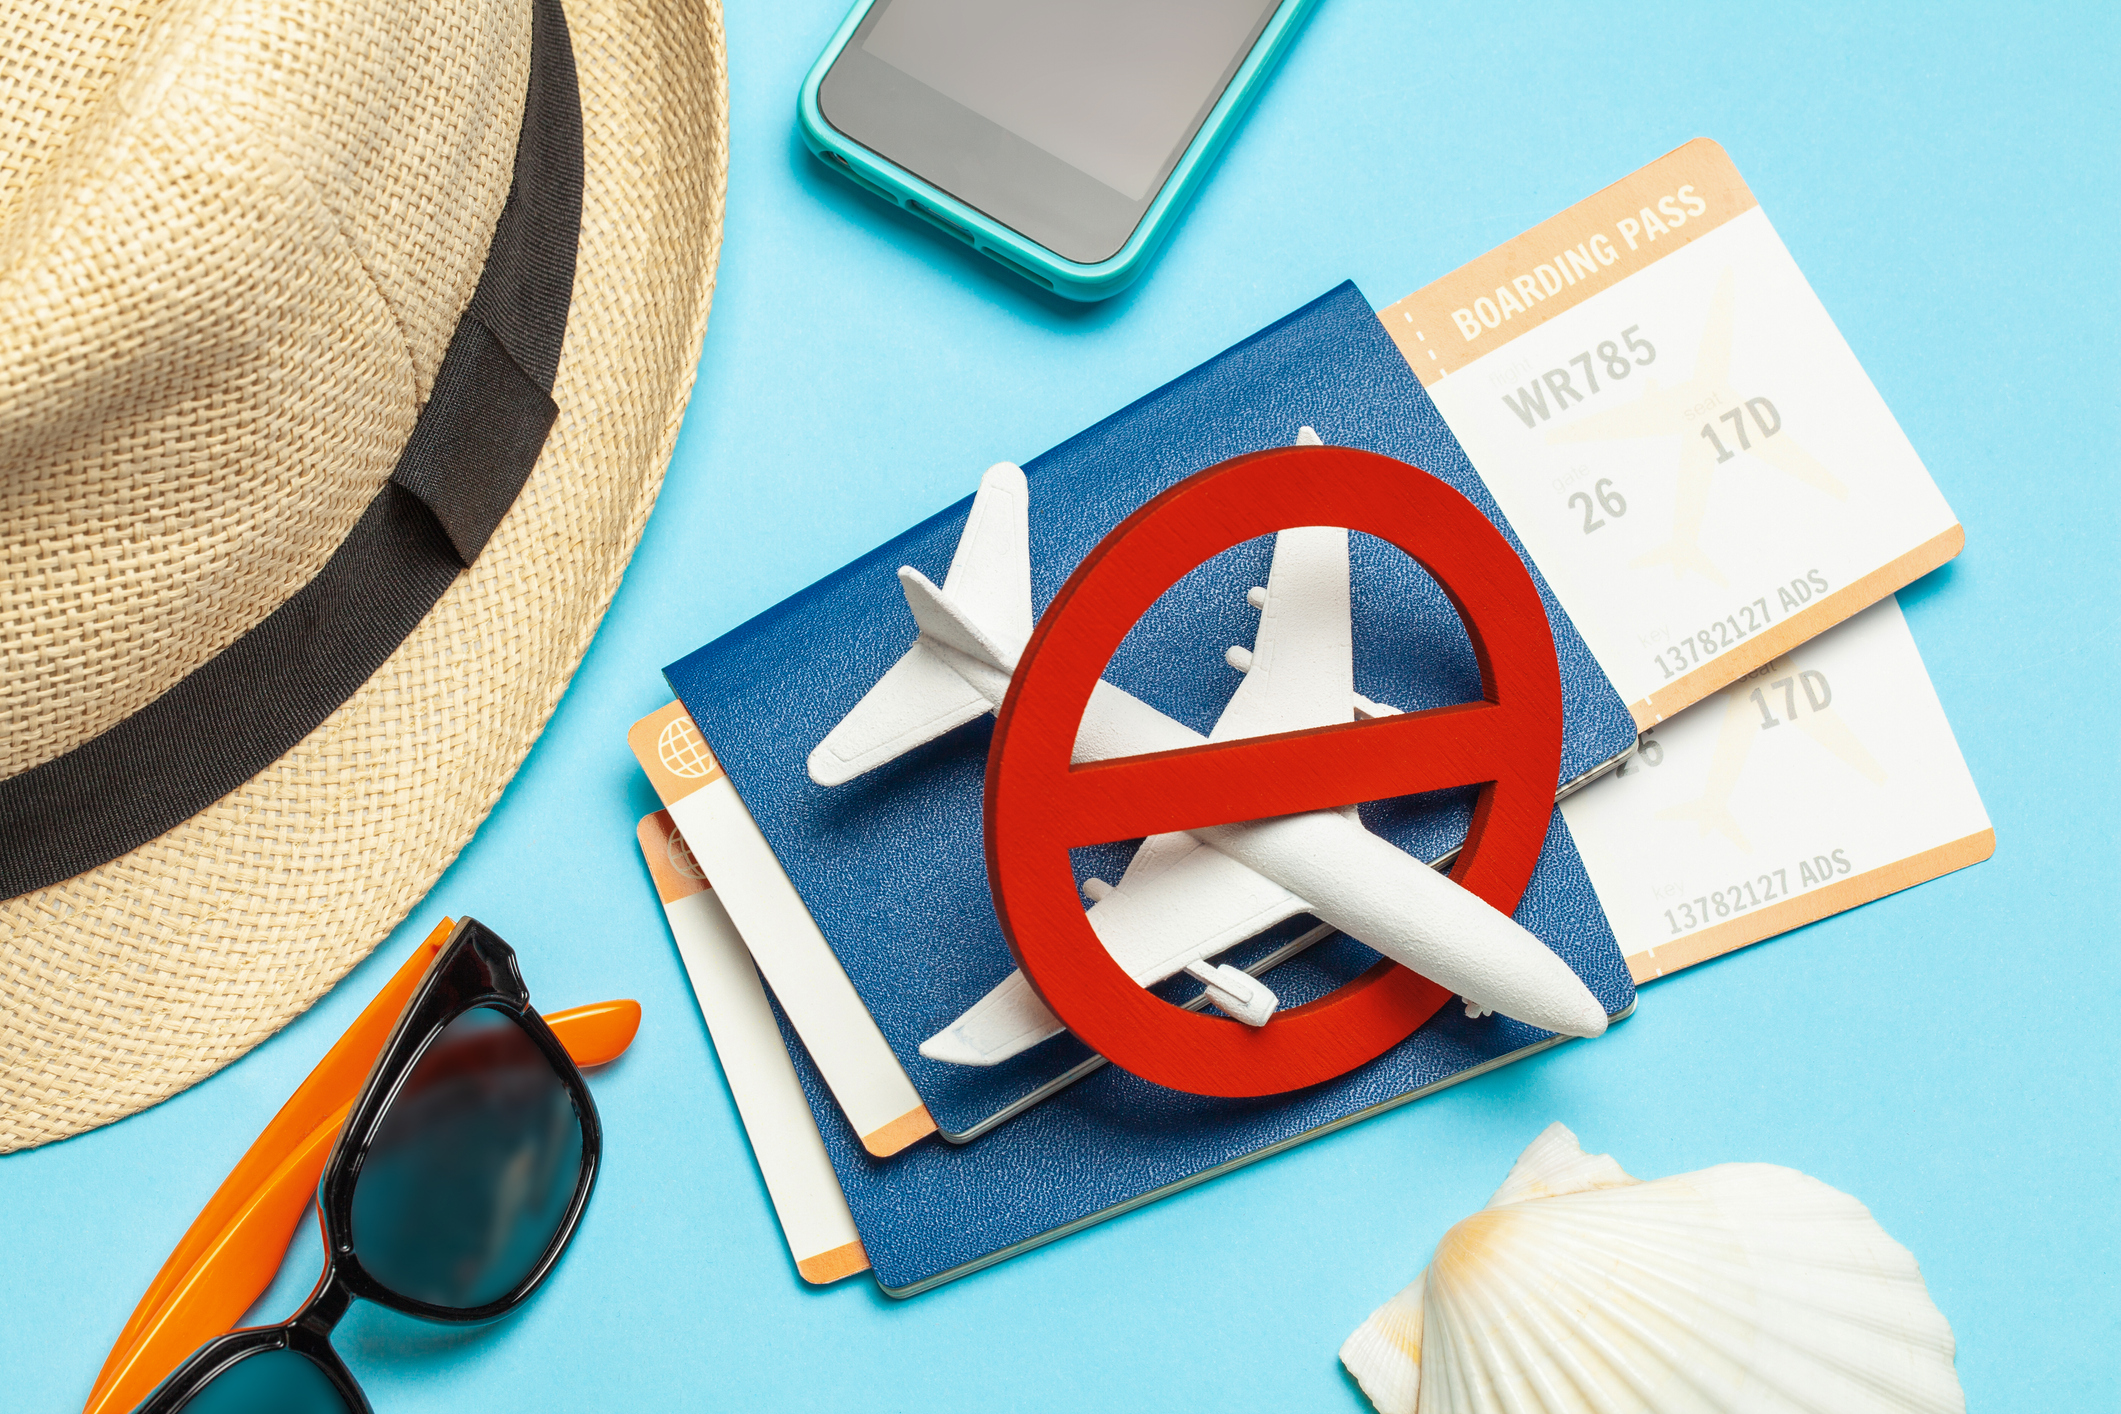 image of various items on blue background: a figurine airplane, brown fedora hat, sunglasses, two passports with boarding passes in them, and a smartphone